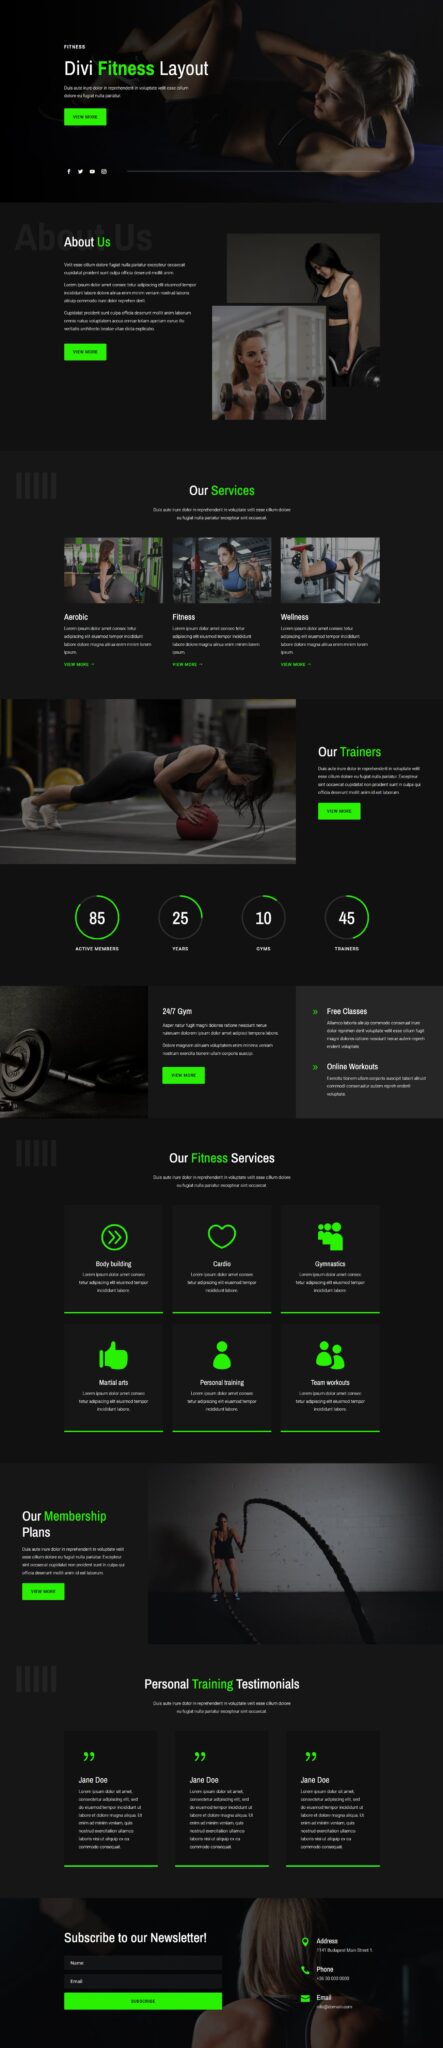 Divi Product Highlight Homepage 25 Divi Layout Pack Fitness